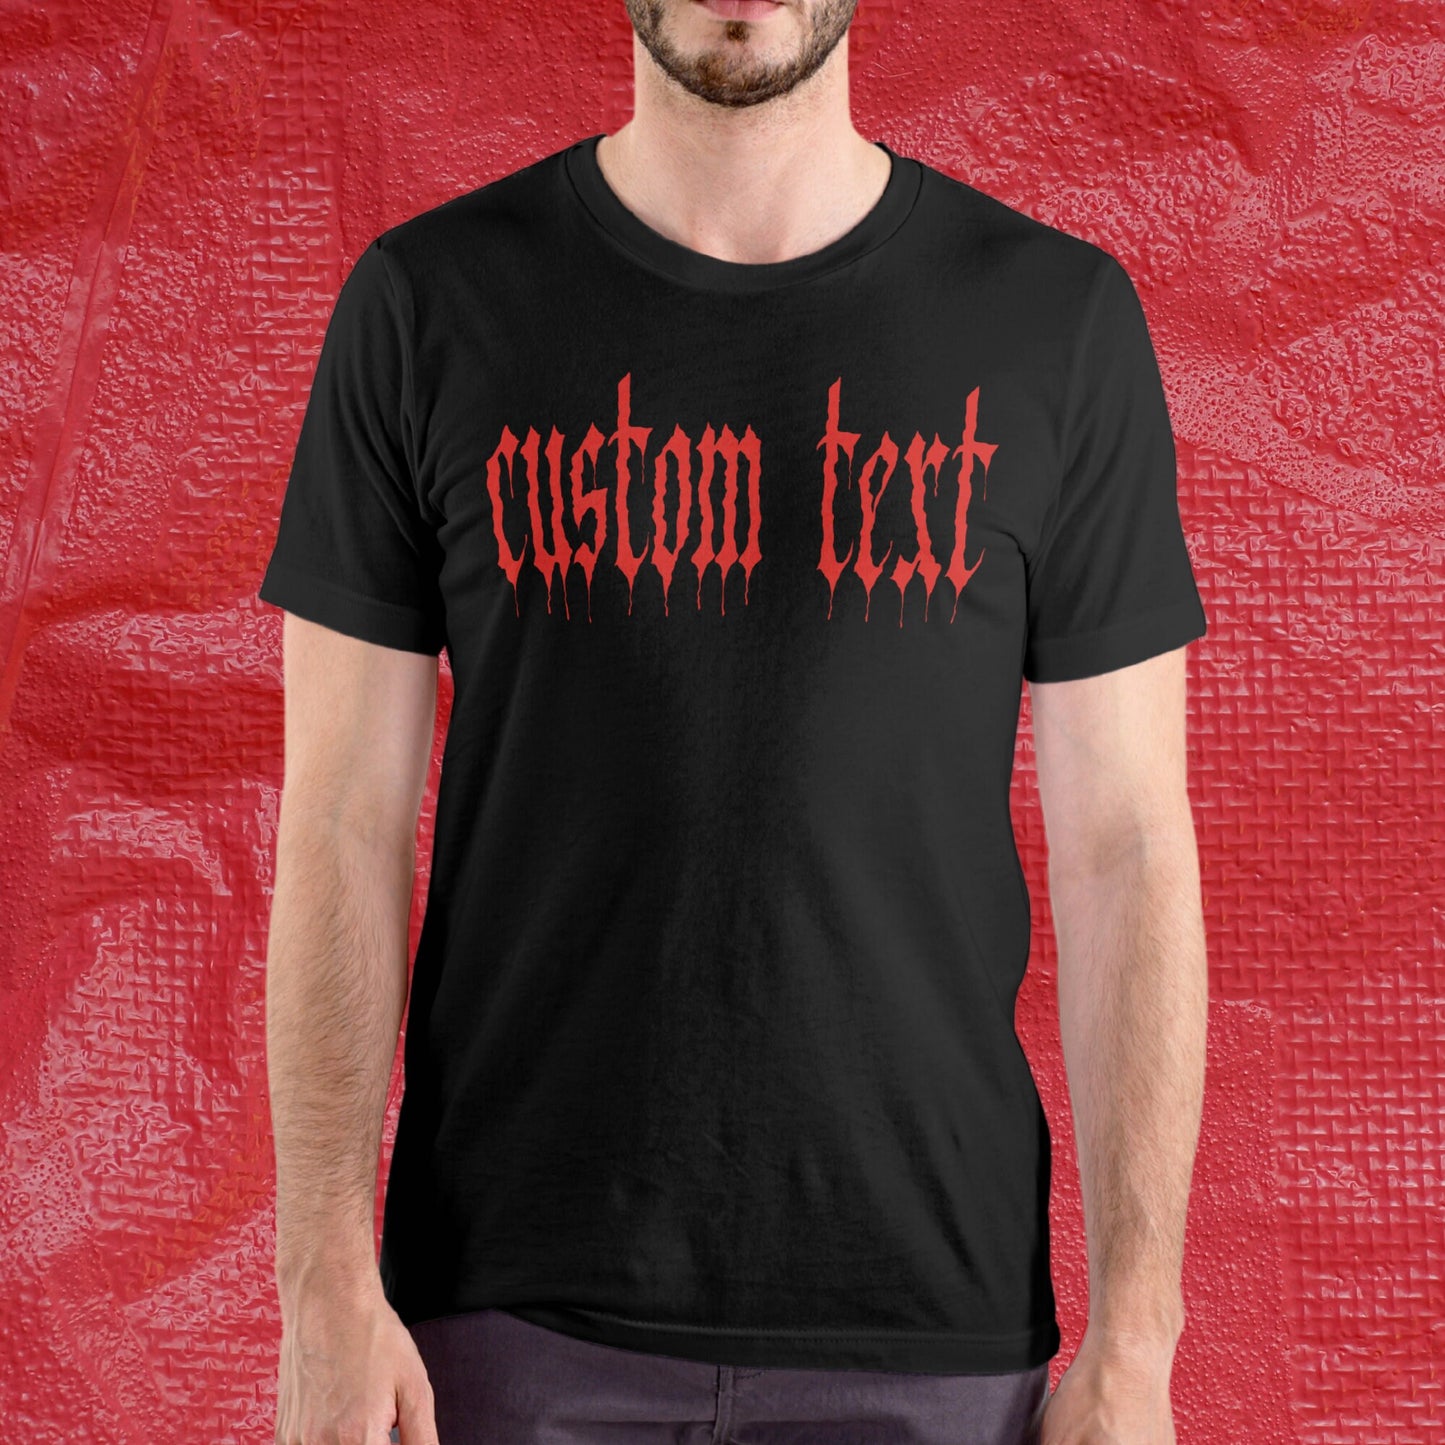 Your Custom Text T-Shirt, Customize Your Own Shirt, Matching Create Your Own Shirts, 20 Font Option Custom Printing Retro y2k Vintage Tee